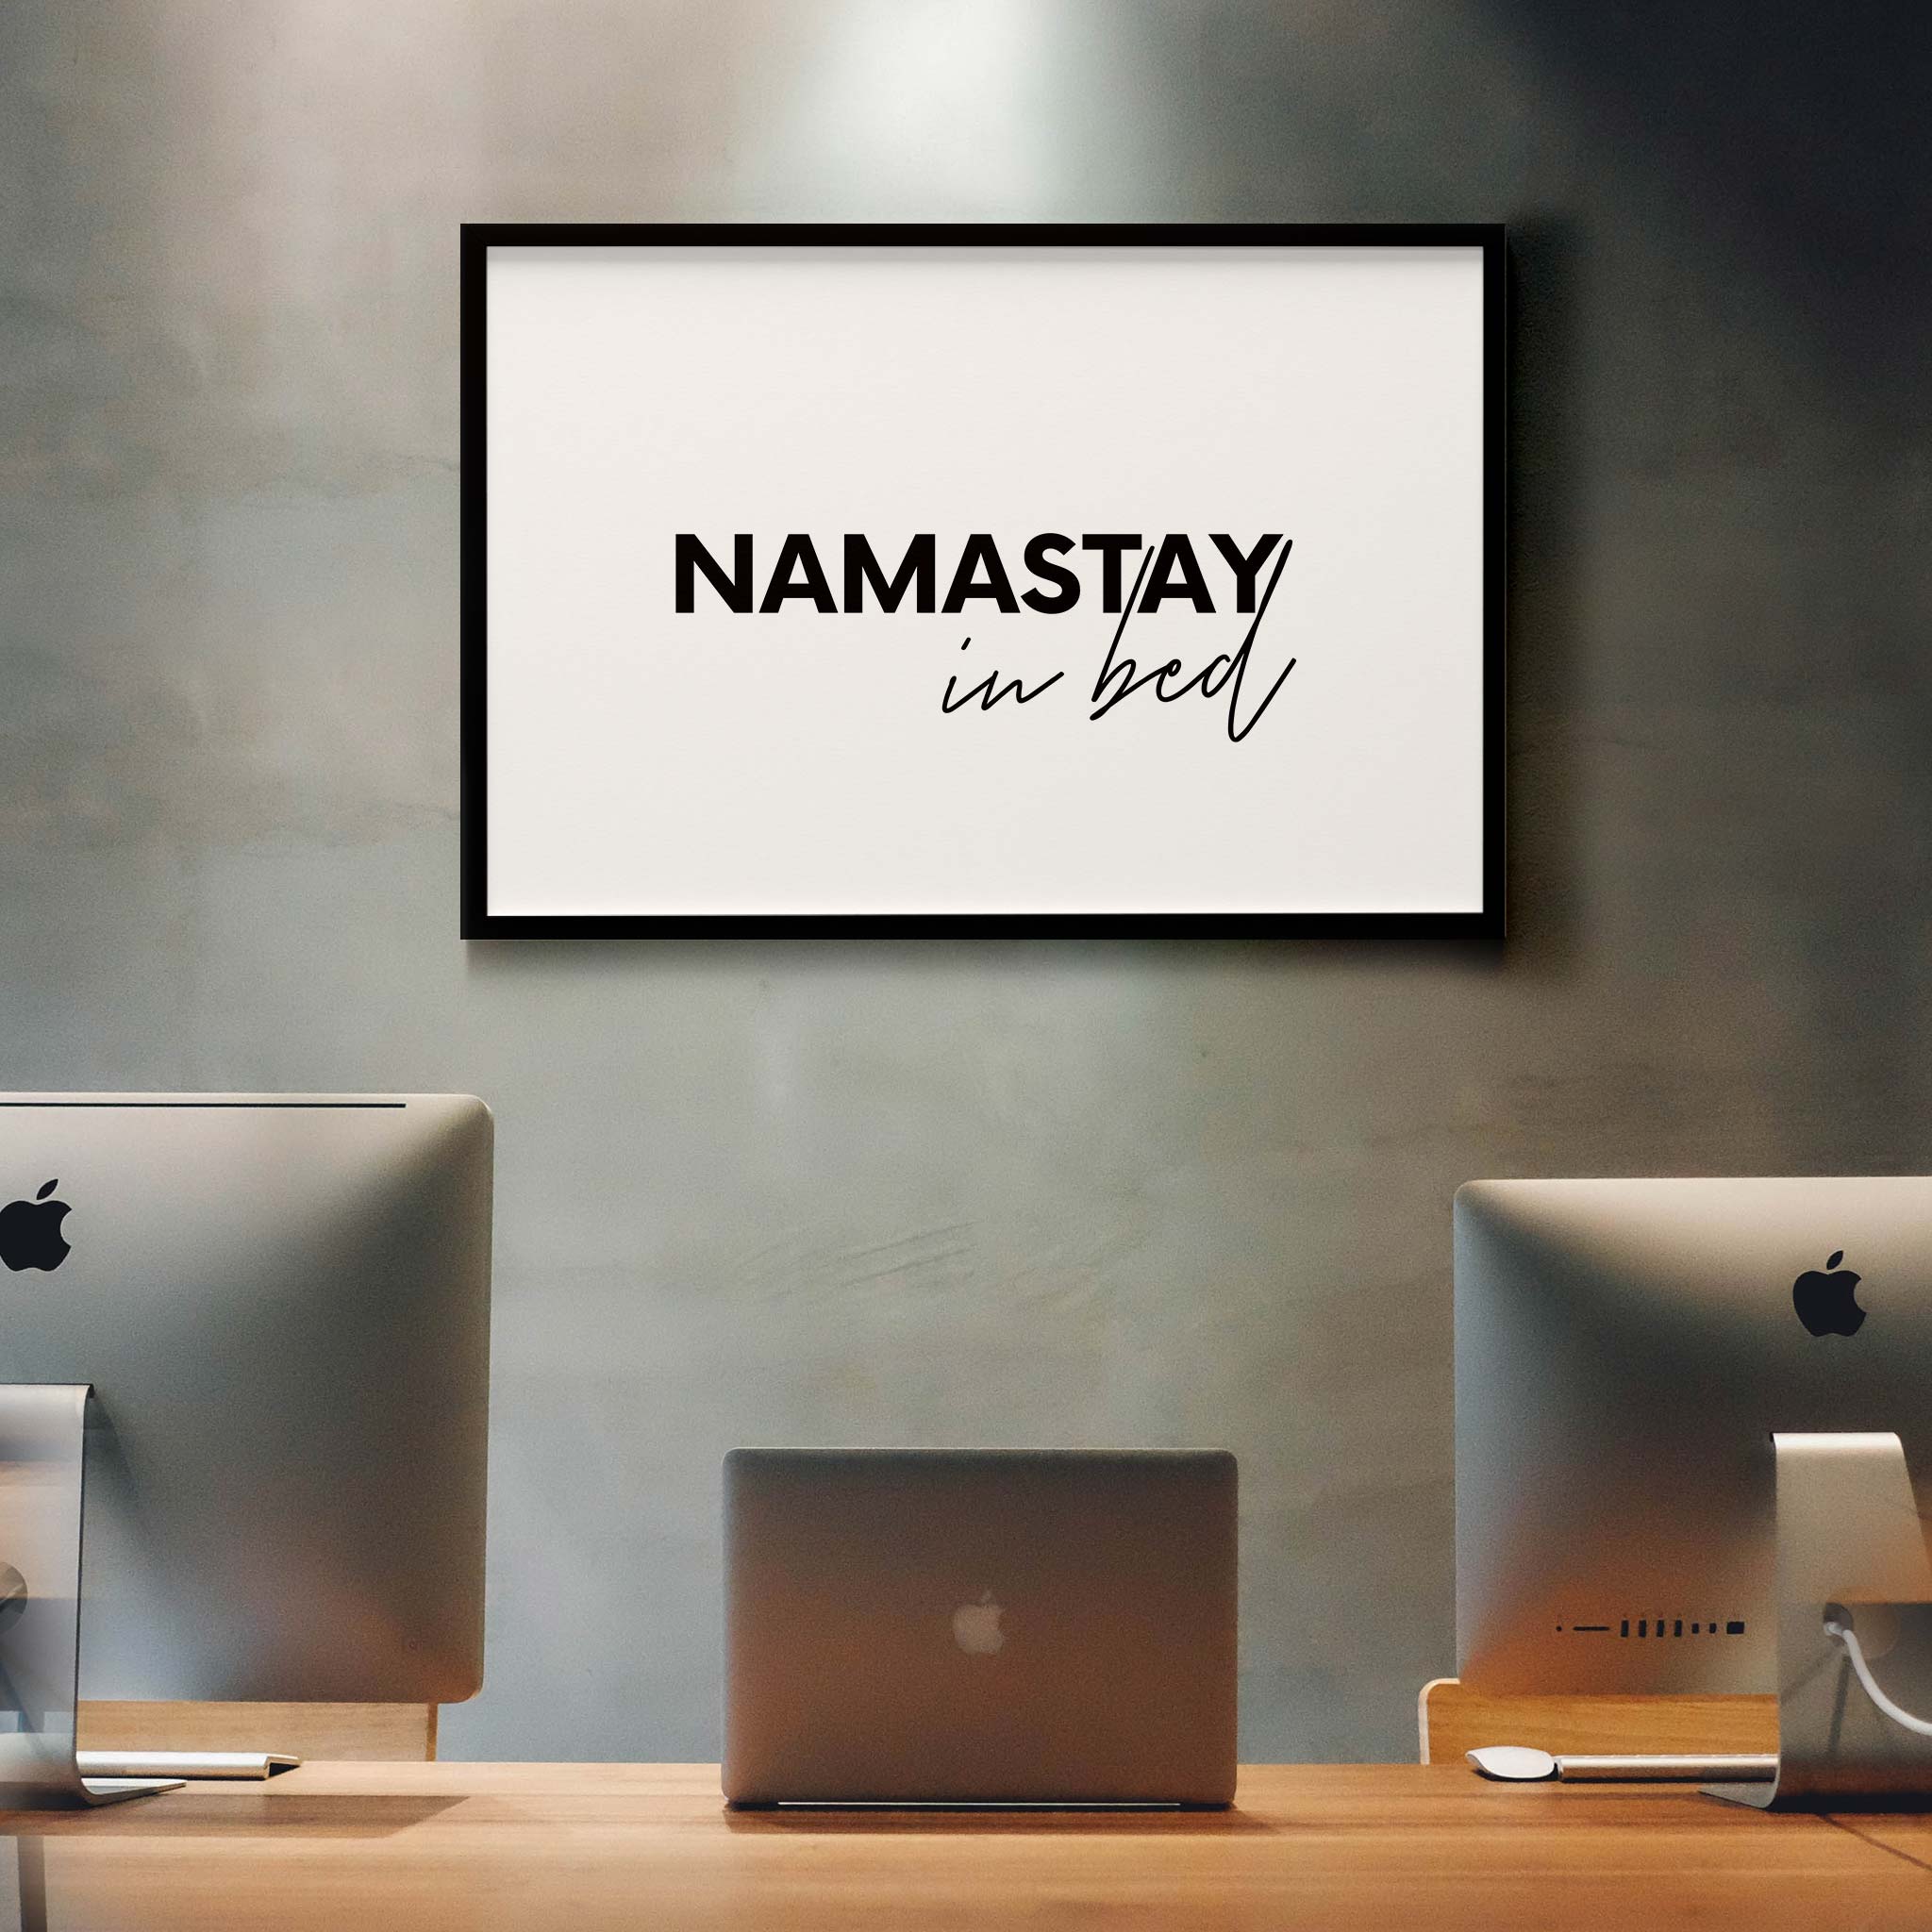 Namastay in bed